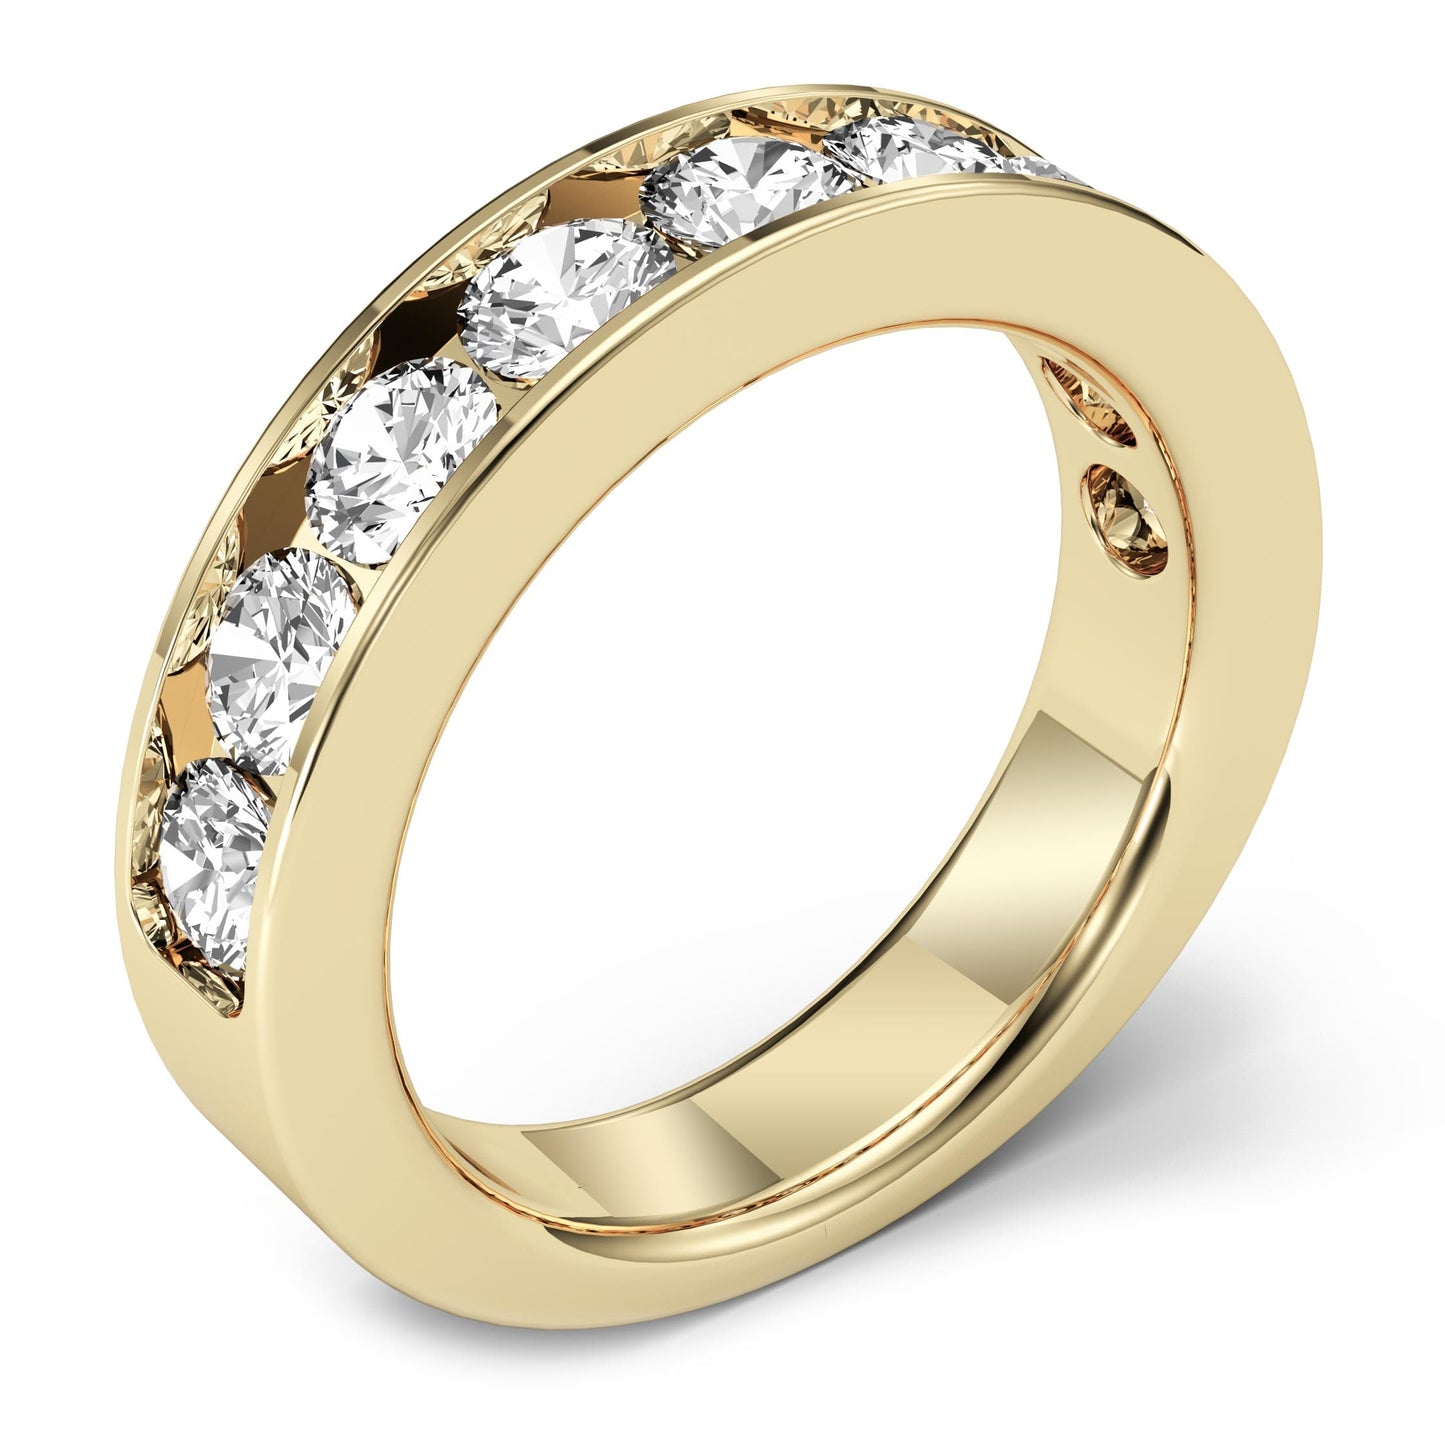 1.5ct Channel Set Round Diamond Ring in 14k Gold